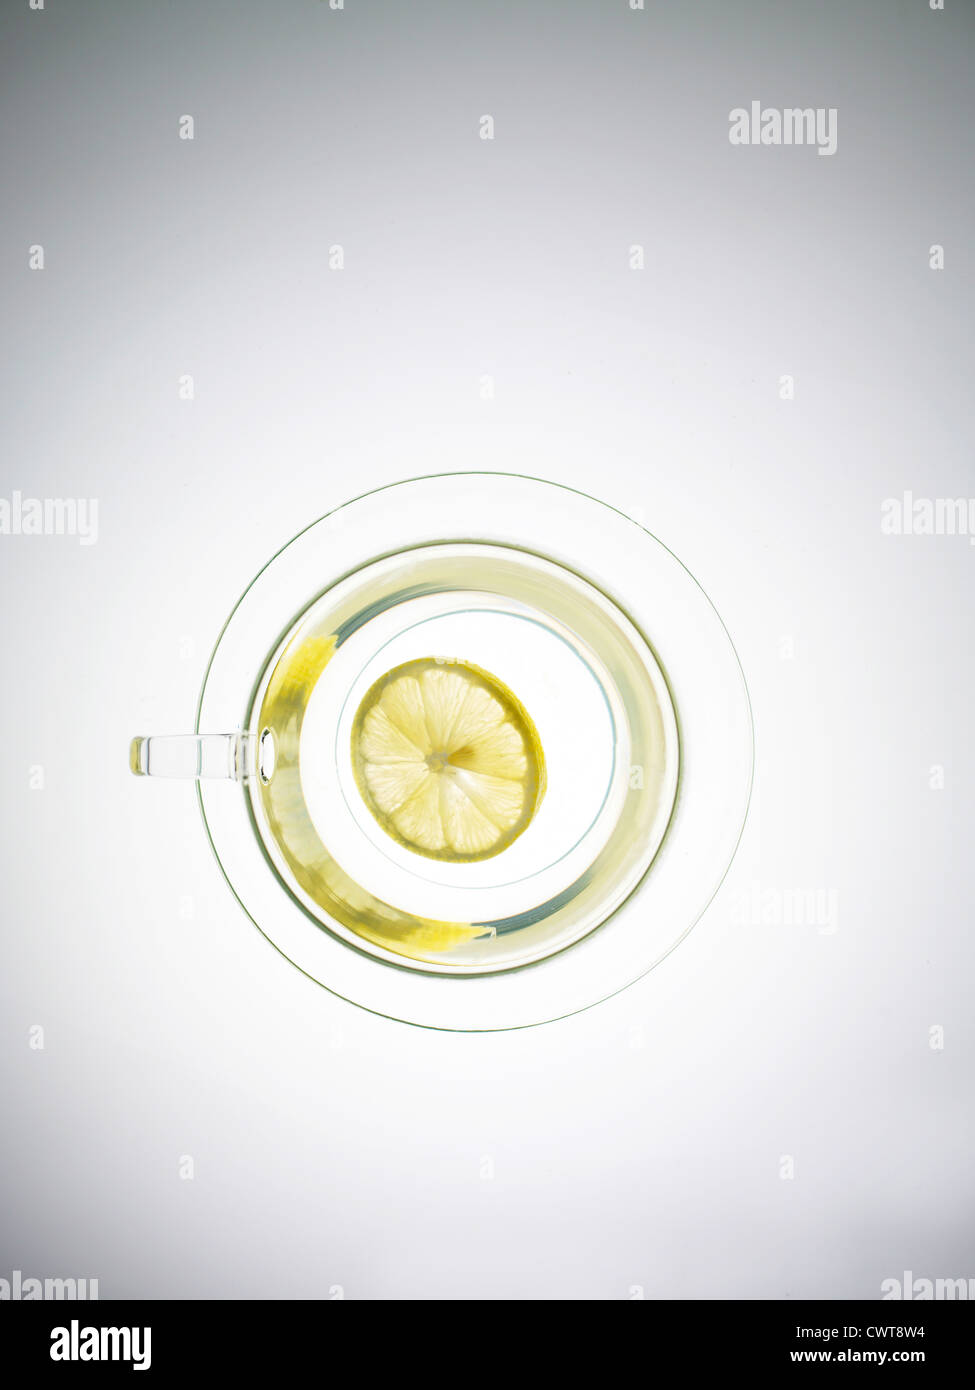 Slice of lemon in a transparent tea cup from overhead Stock Photo